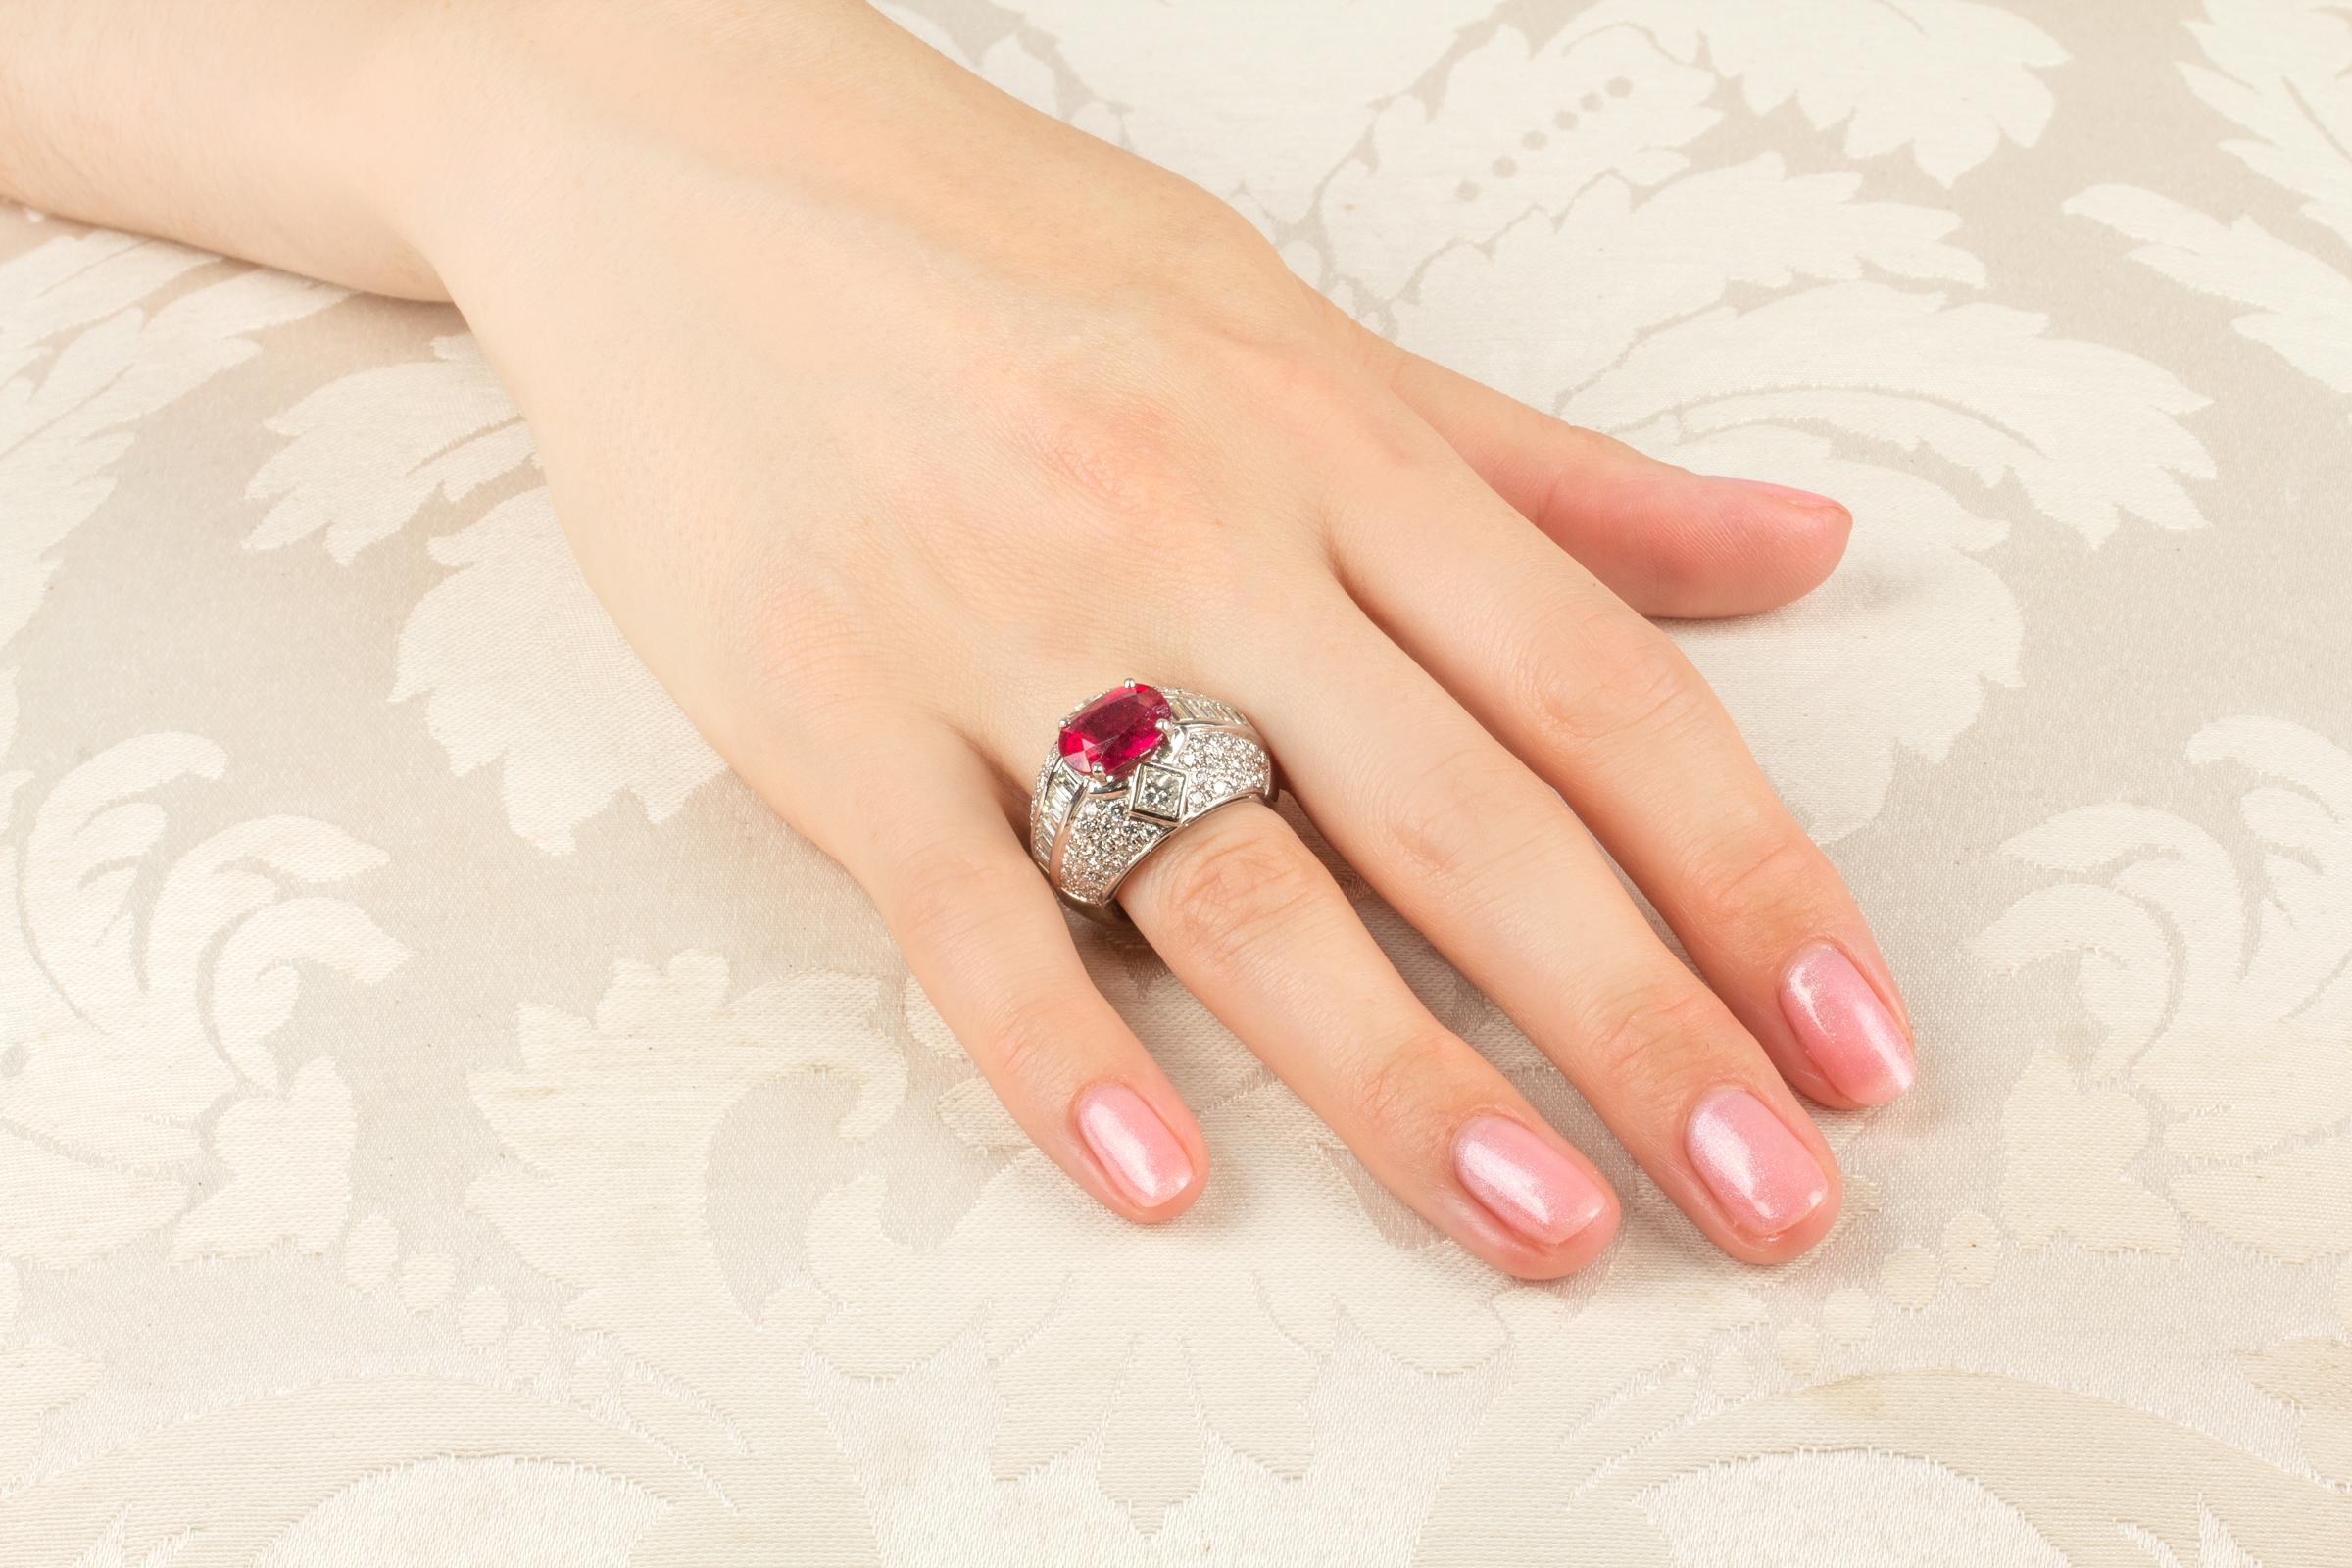 This ruby and diamond cocktail ring of geometric design features a faceted oval-cut ruby (4.40 carats) flanked by 2 princess-cut diamonds (0.75 carats) with a descending row of custom-cut baguette diamonds (1.85 carats). The design is complete with